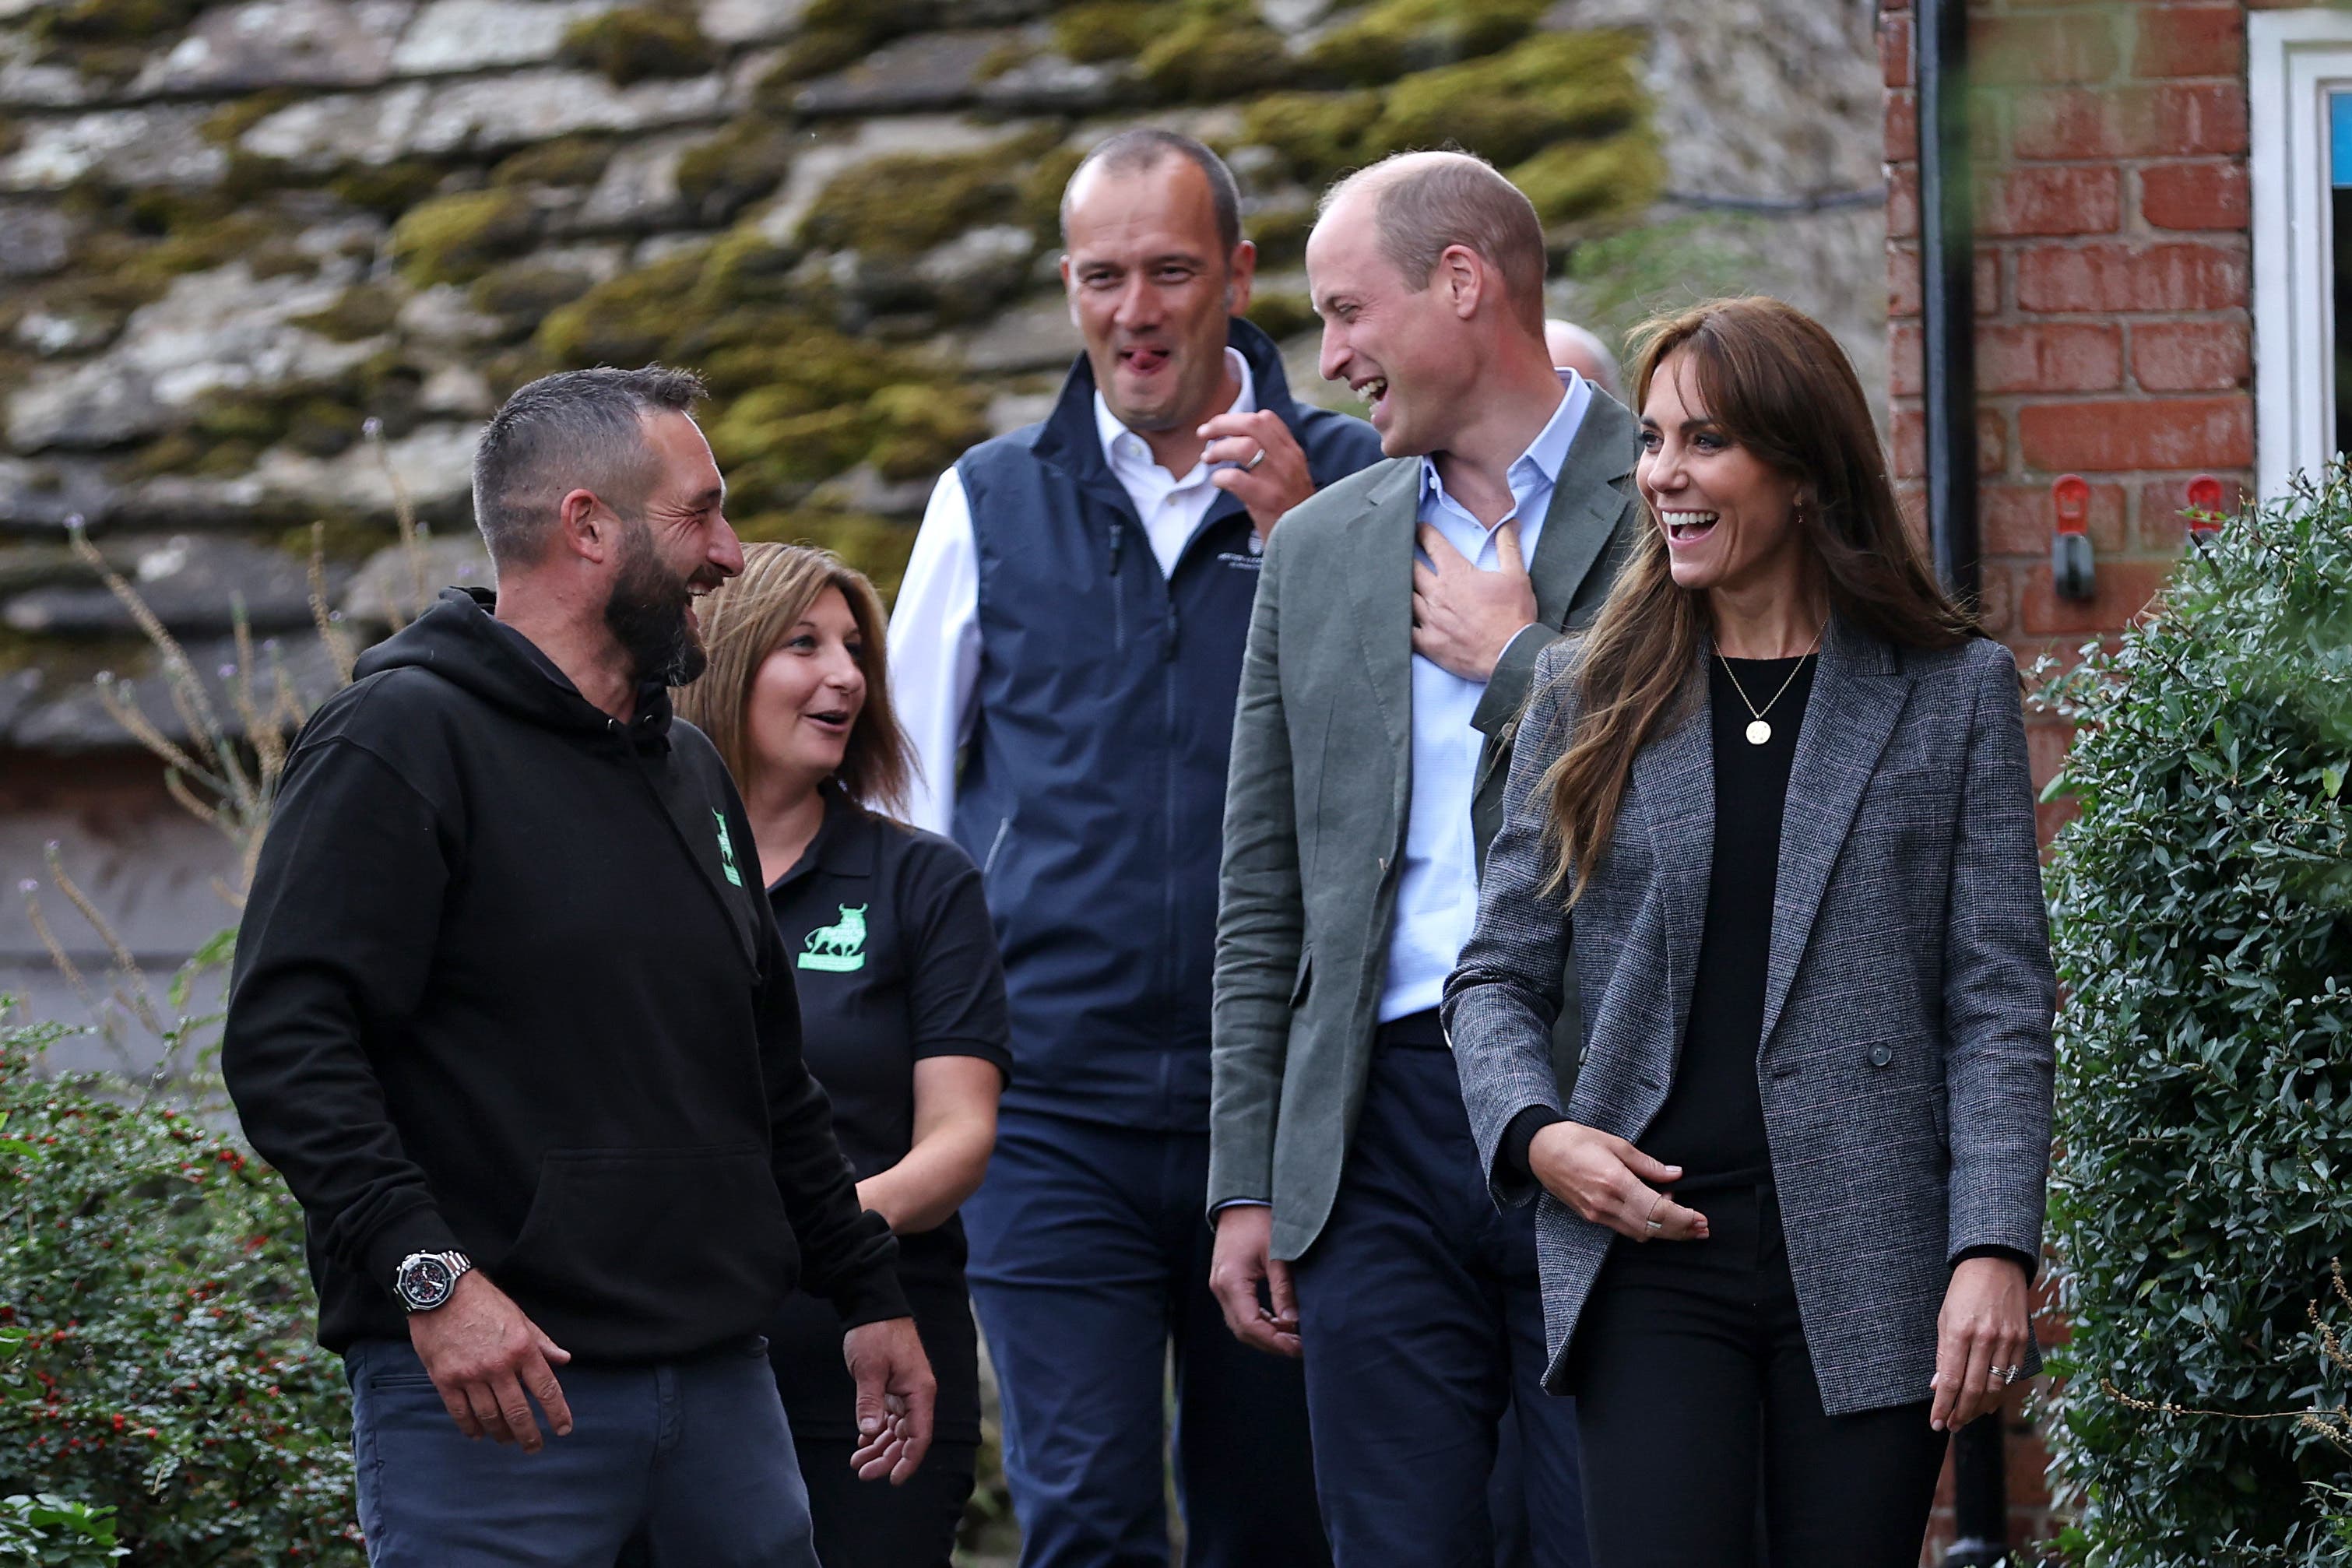 Farmer praises compassionate William for mental health charity support The Independent image